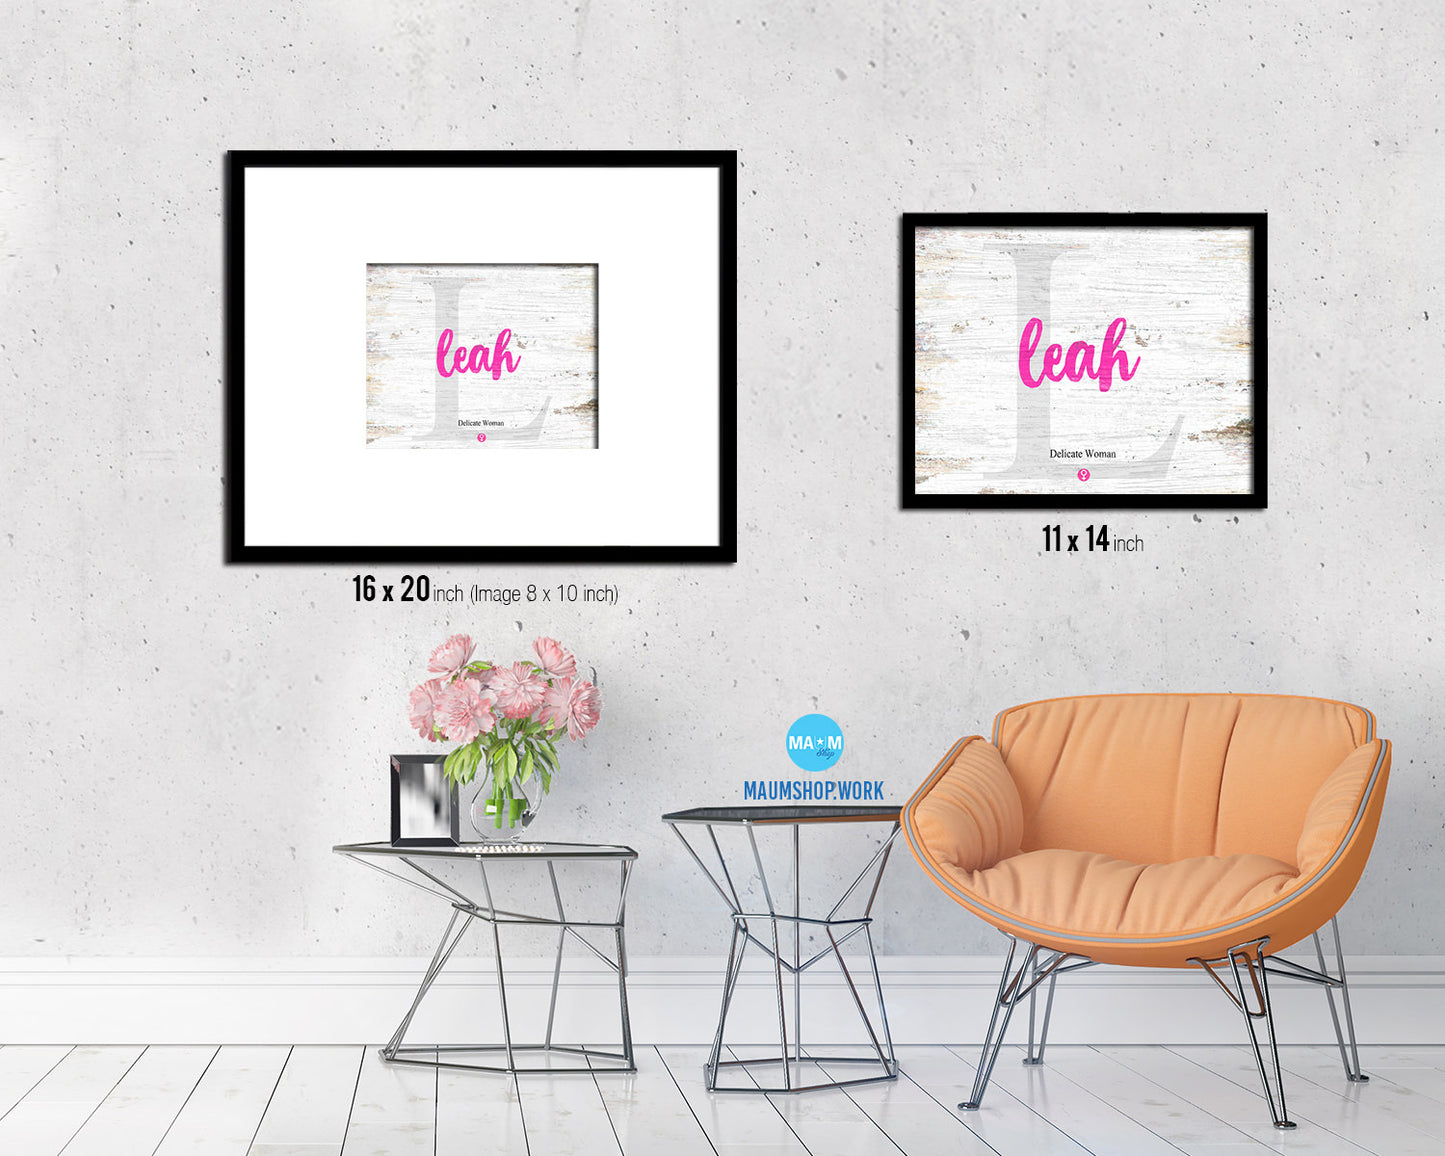 Leah Personalized Biblical Name Plate Art Framed Print Kids Baby Room Wall Decor Gifts